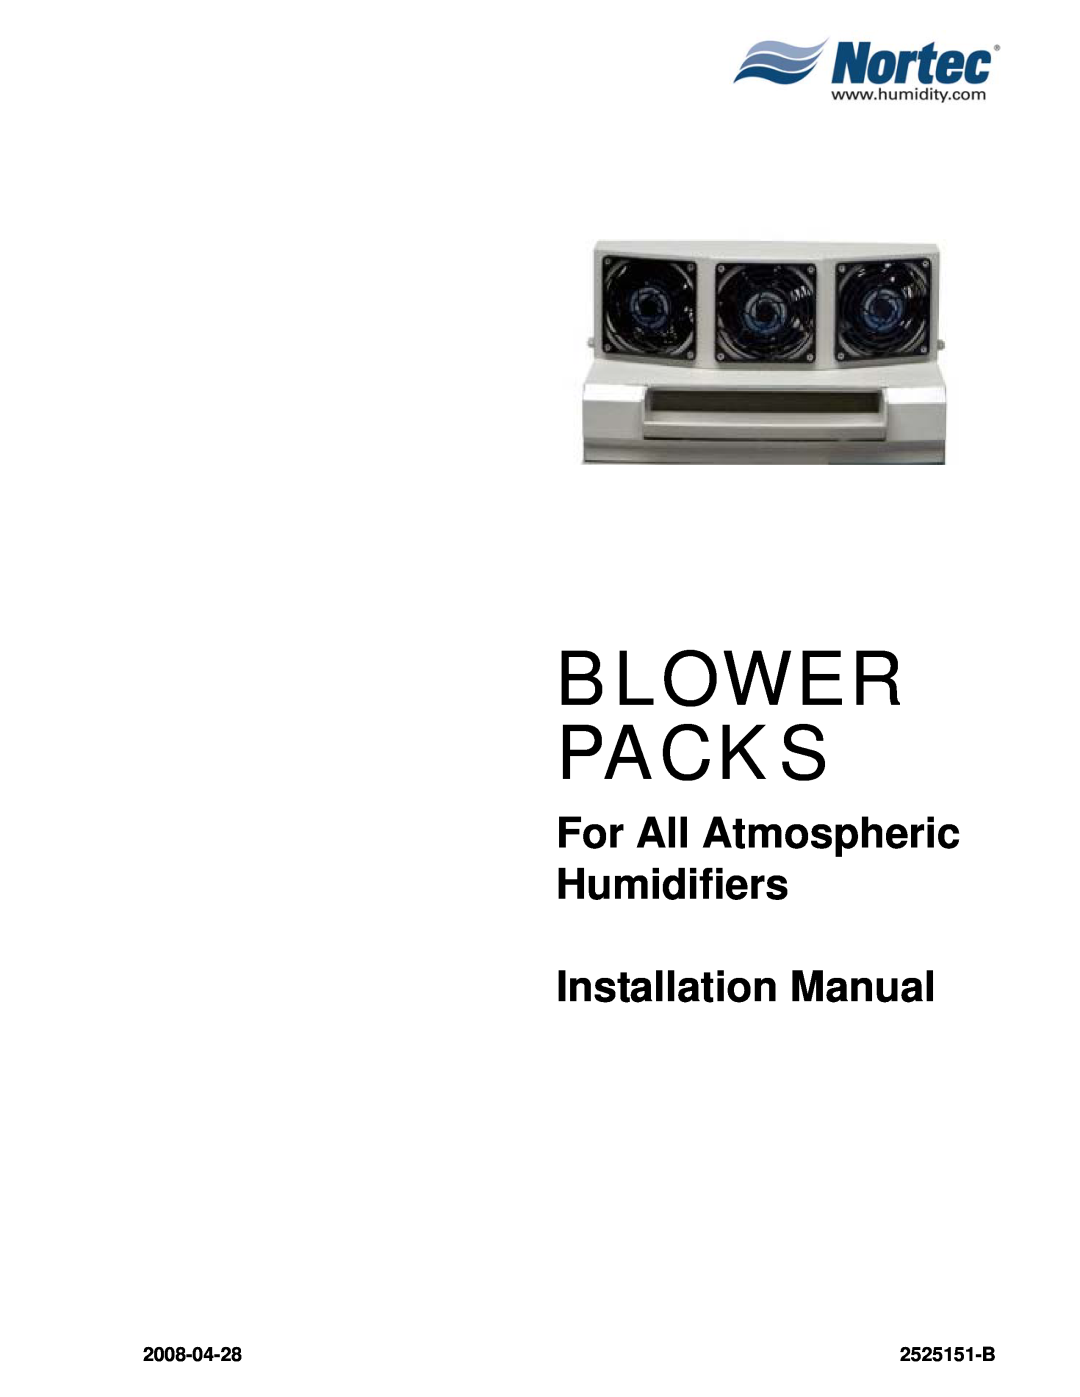 Nortec 380V installation manual 2008-04-28, 2525151-B, Blower Packs, For All Atmospheric Humidifiers, Installation Manual 